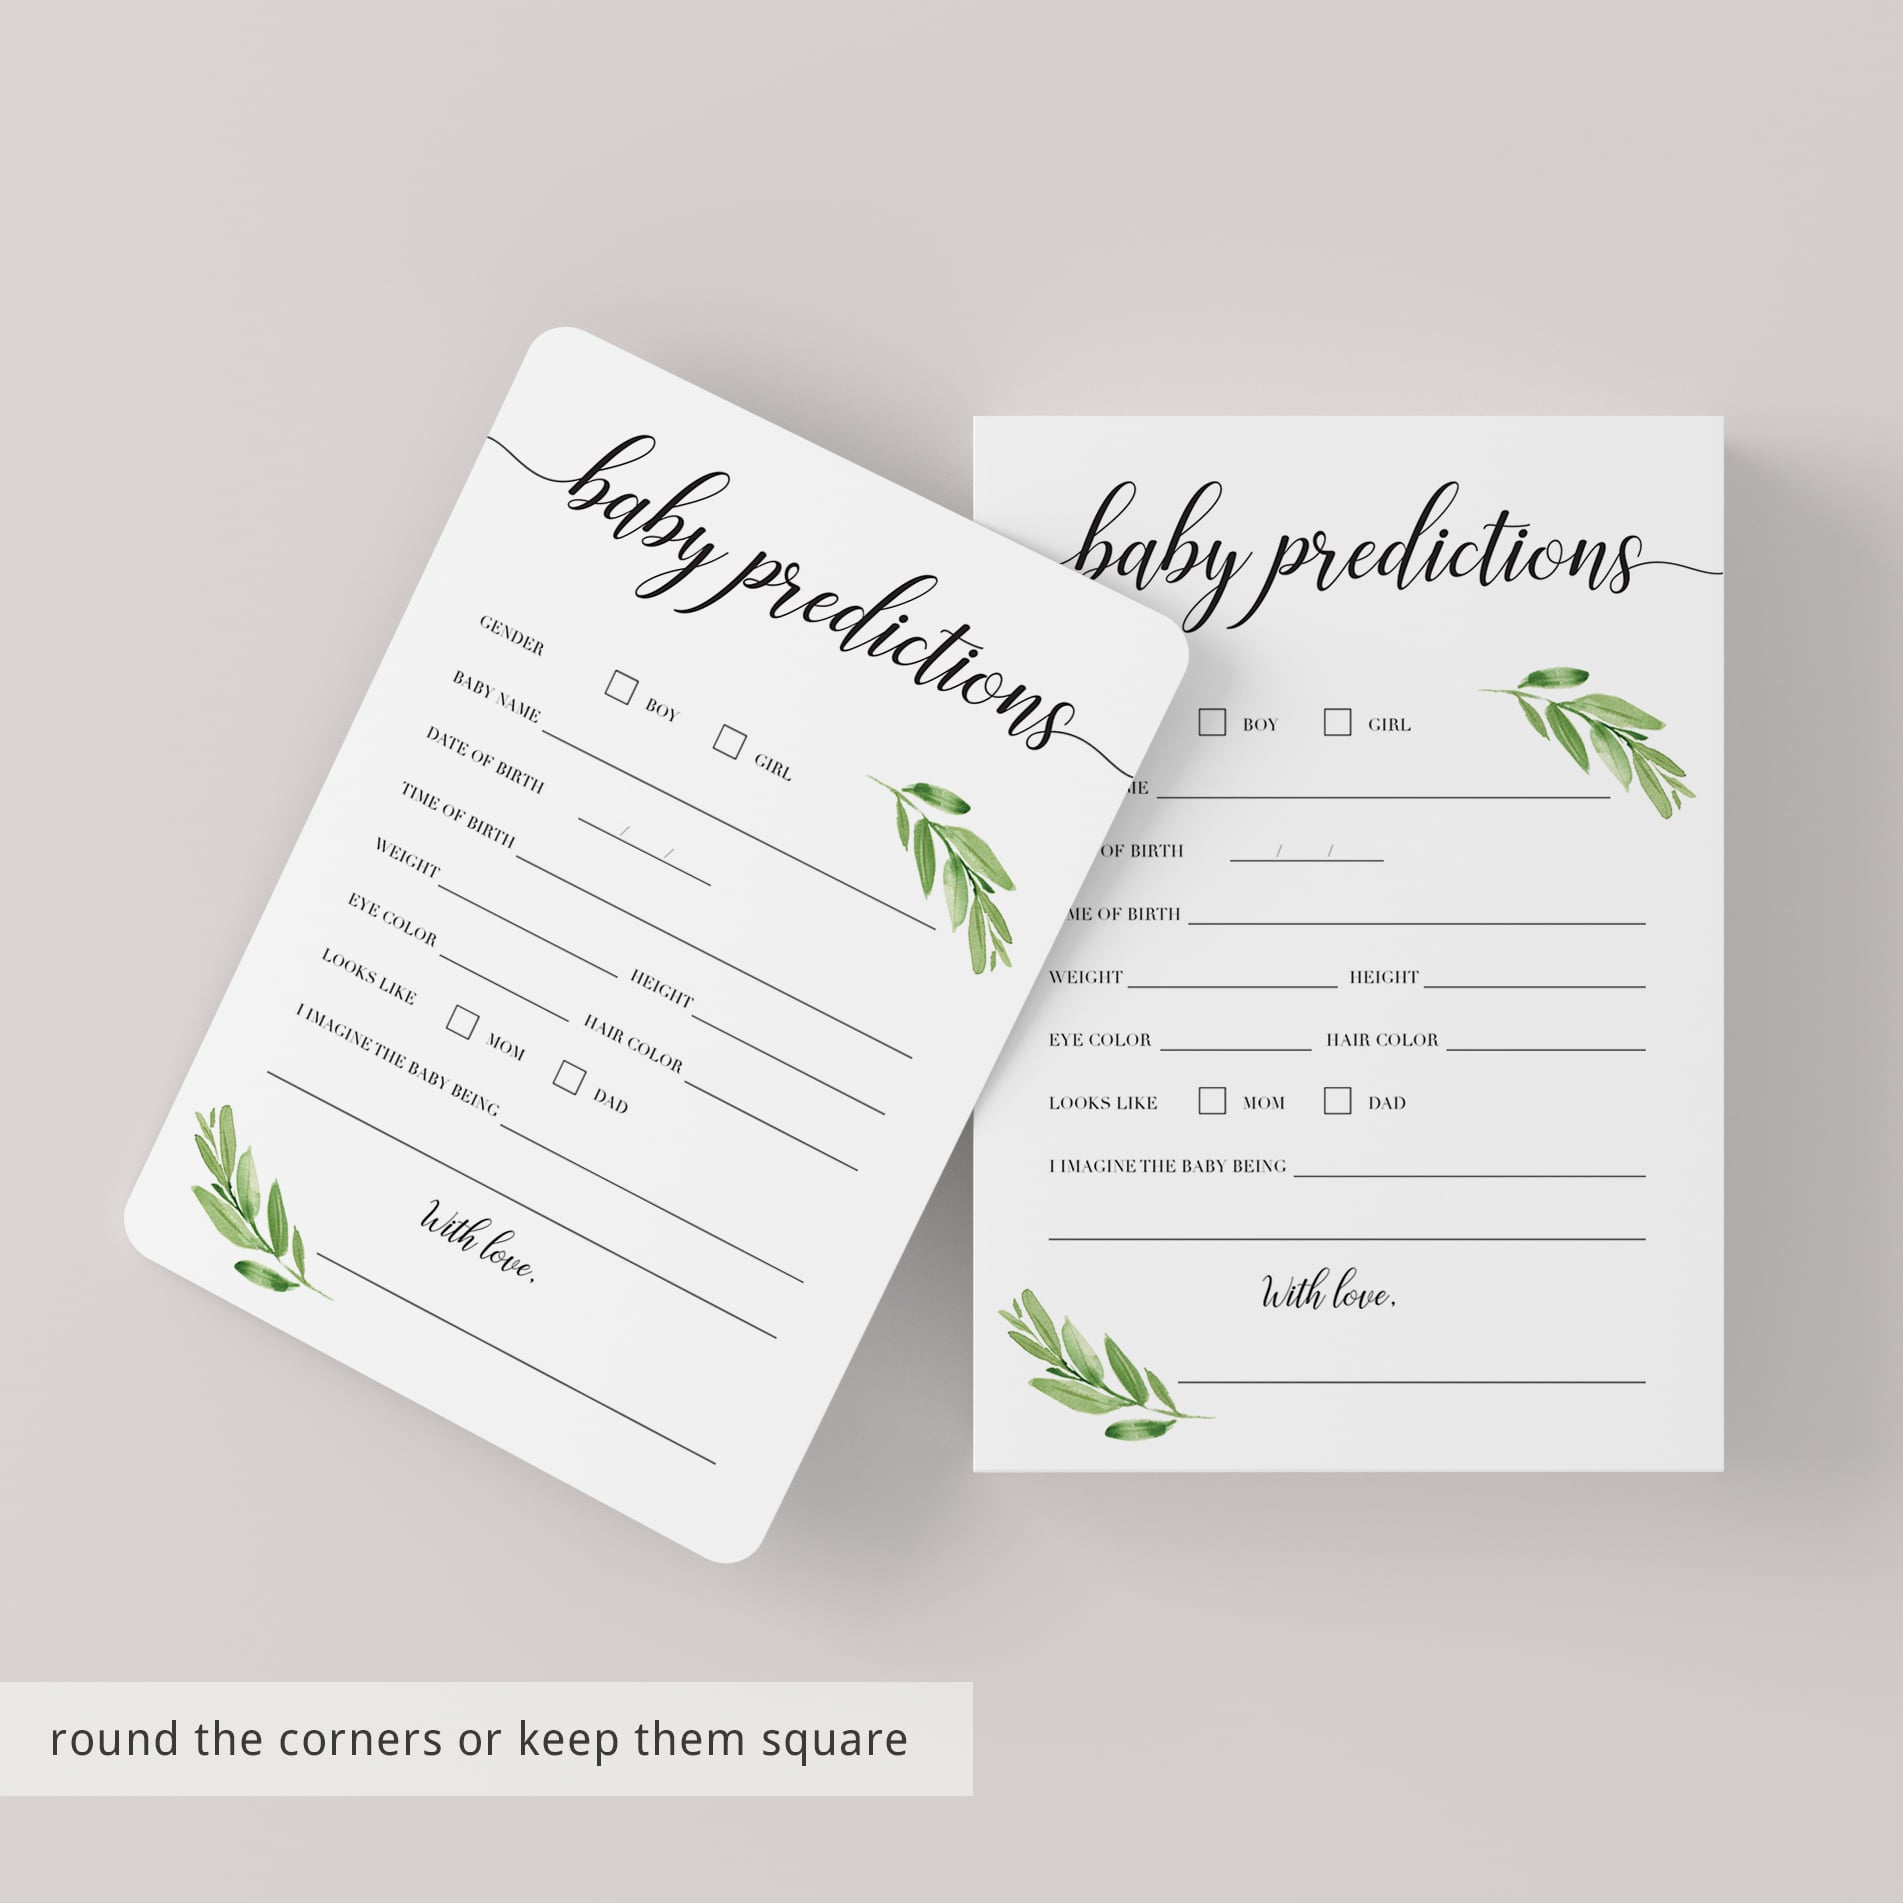 Printable baby prediction card for green baby shower by LittleSizzle